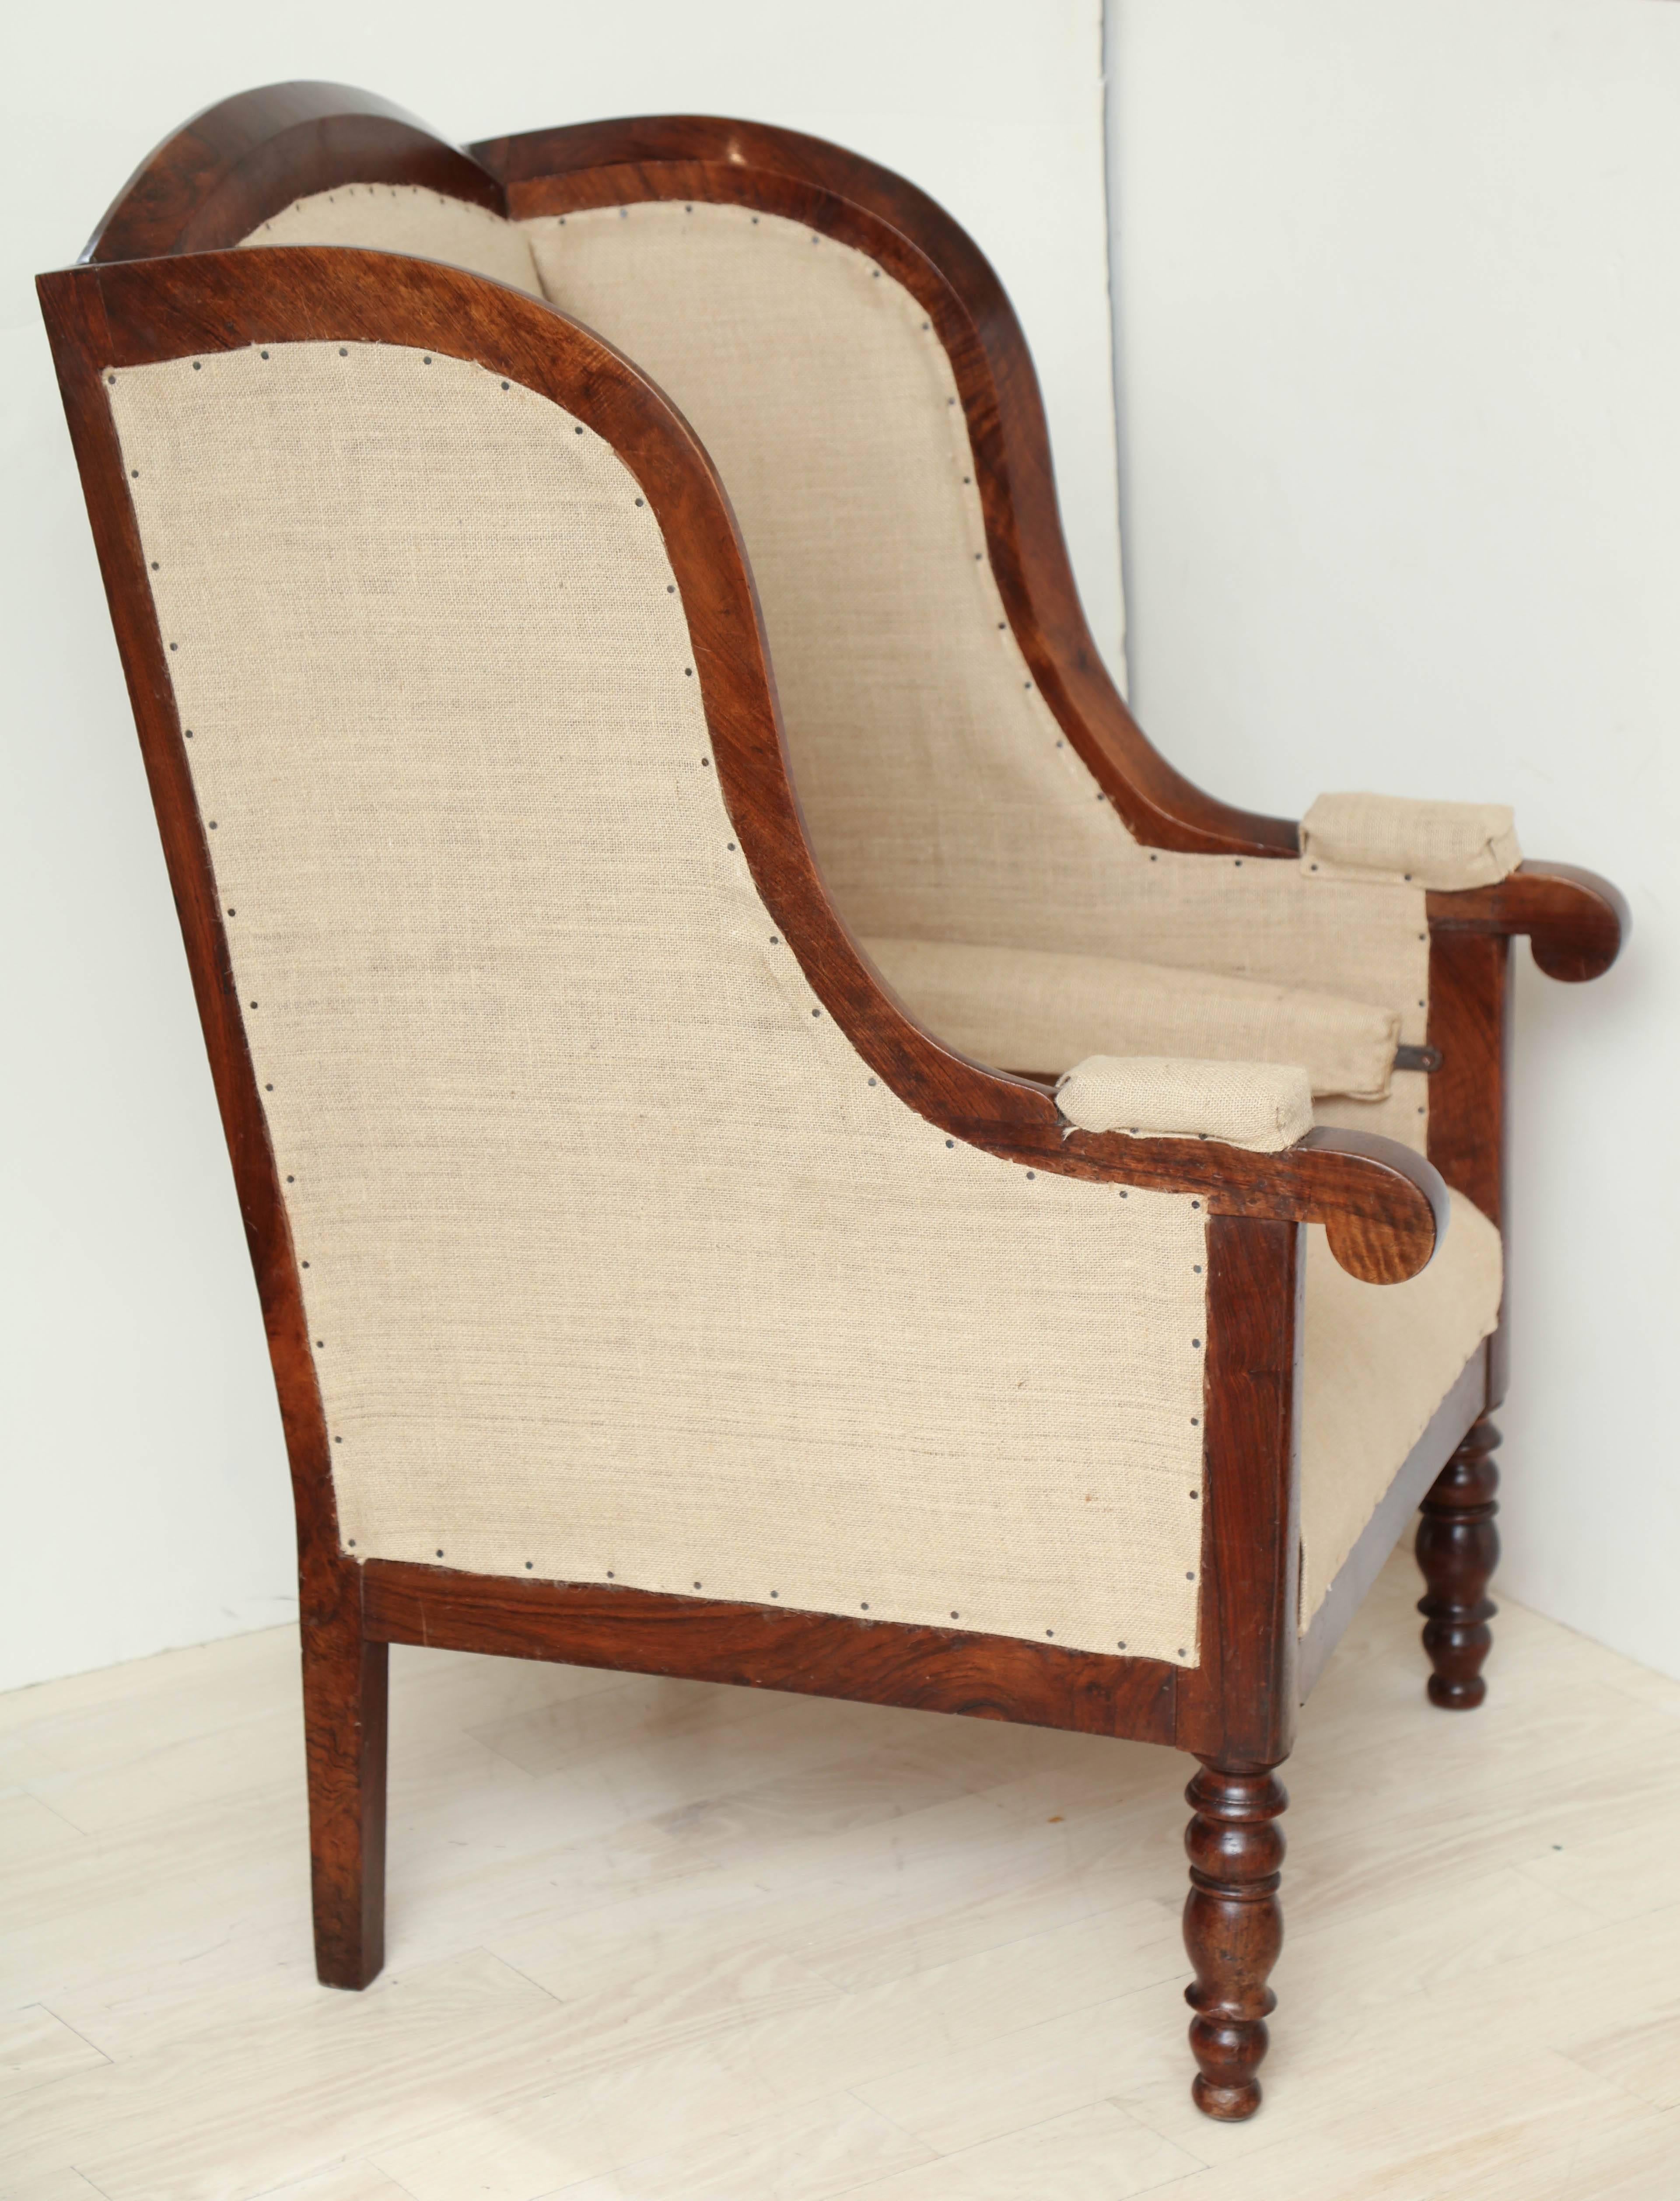 Early 19th Century French Walnut Upholstered Wing Chair For Sale 2